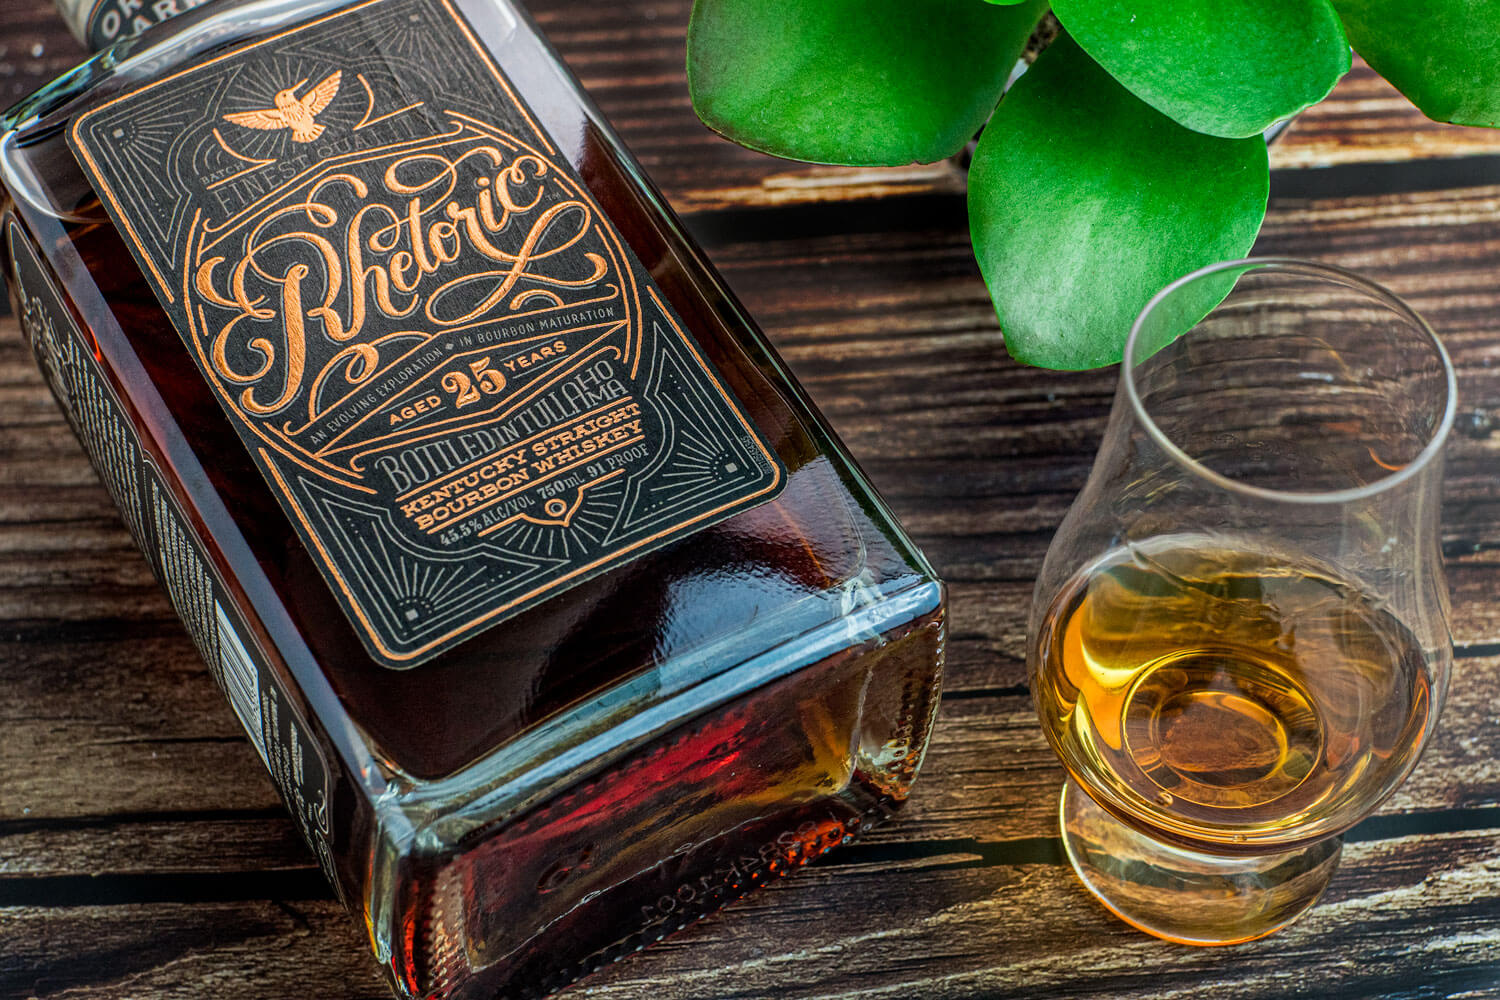 Rhetoric 25-Year-Old bottle and pour